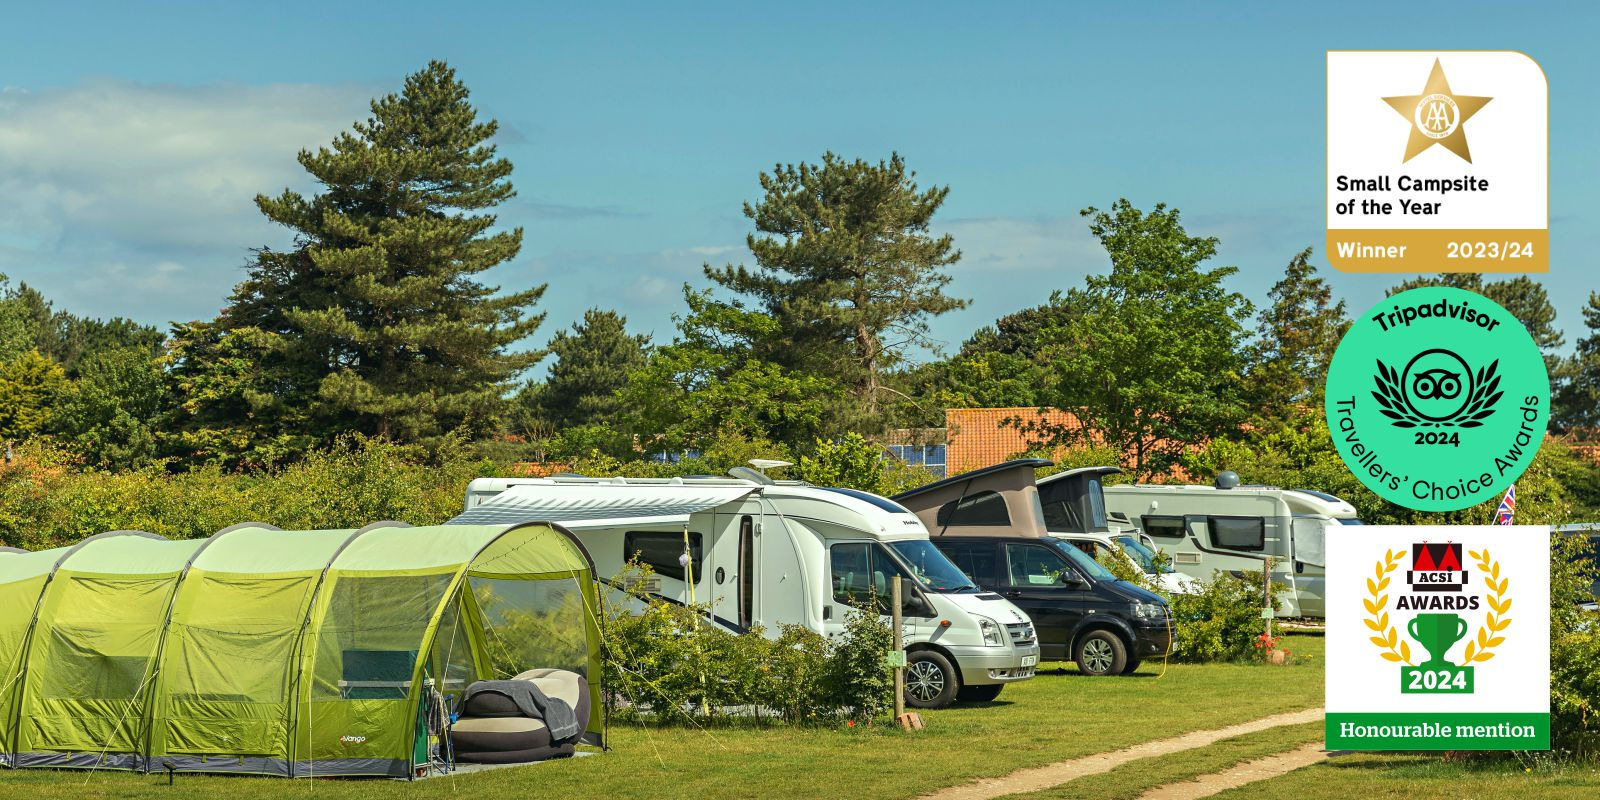 Deepdale Camping on the beautiful North Norfolk Coast